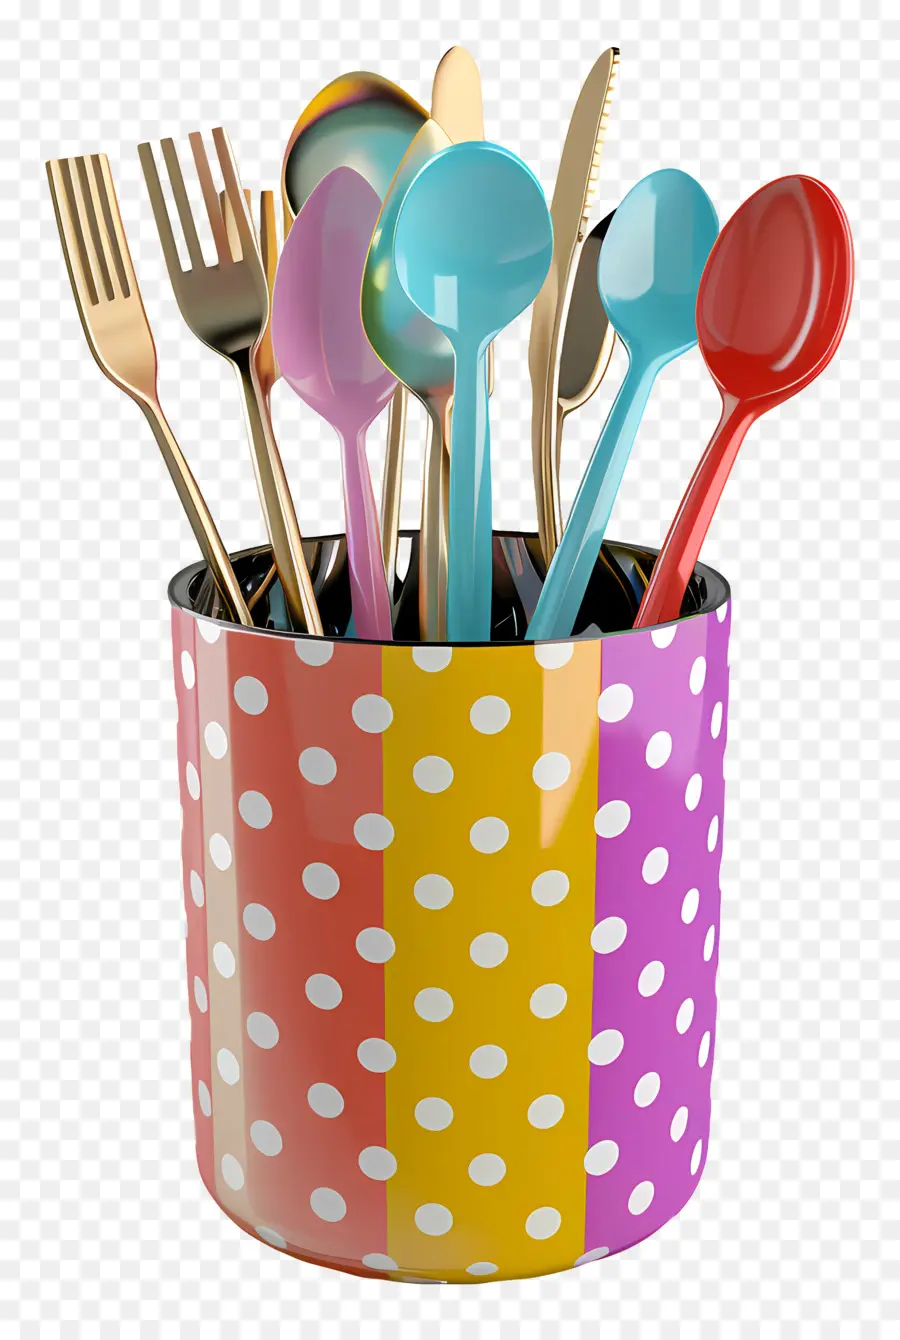 cutlery holder silver stainless steel cups golden spoon handles polka dot pattern colorful cutlery set